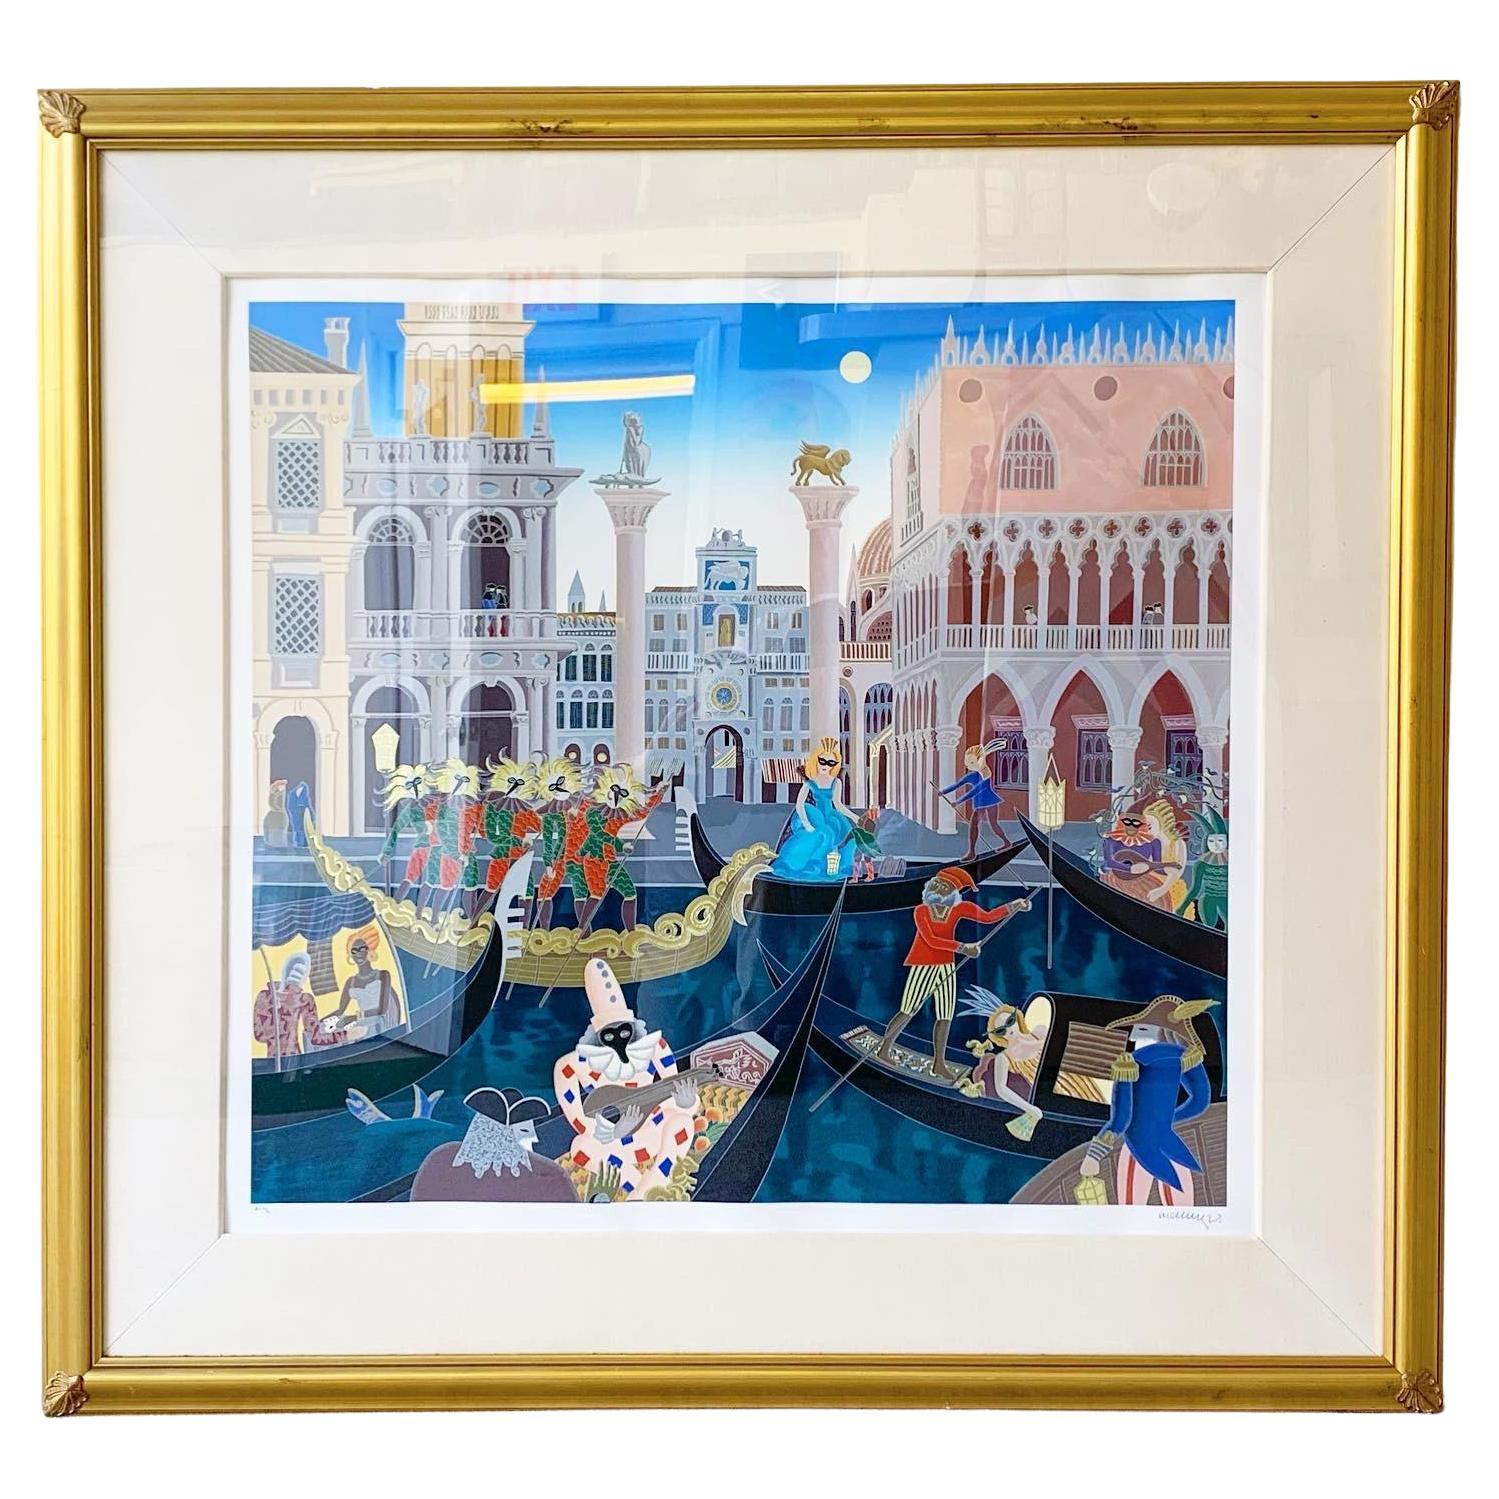 Venetian Suite of 2, Carnival in Venice 'Venetian Tale', 1988, Framed and Signed